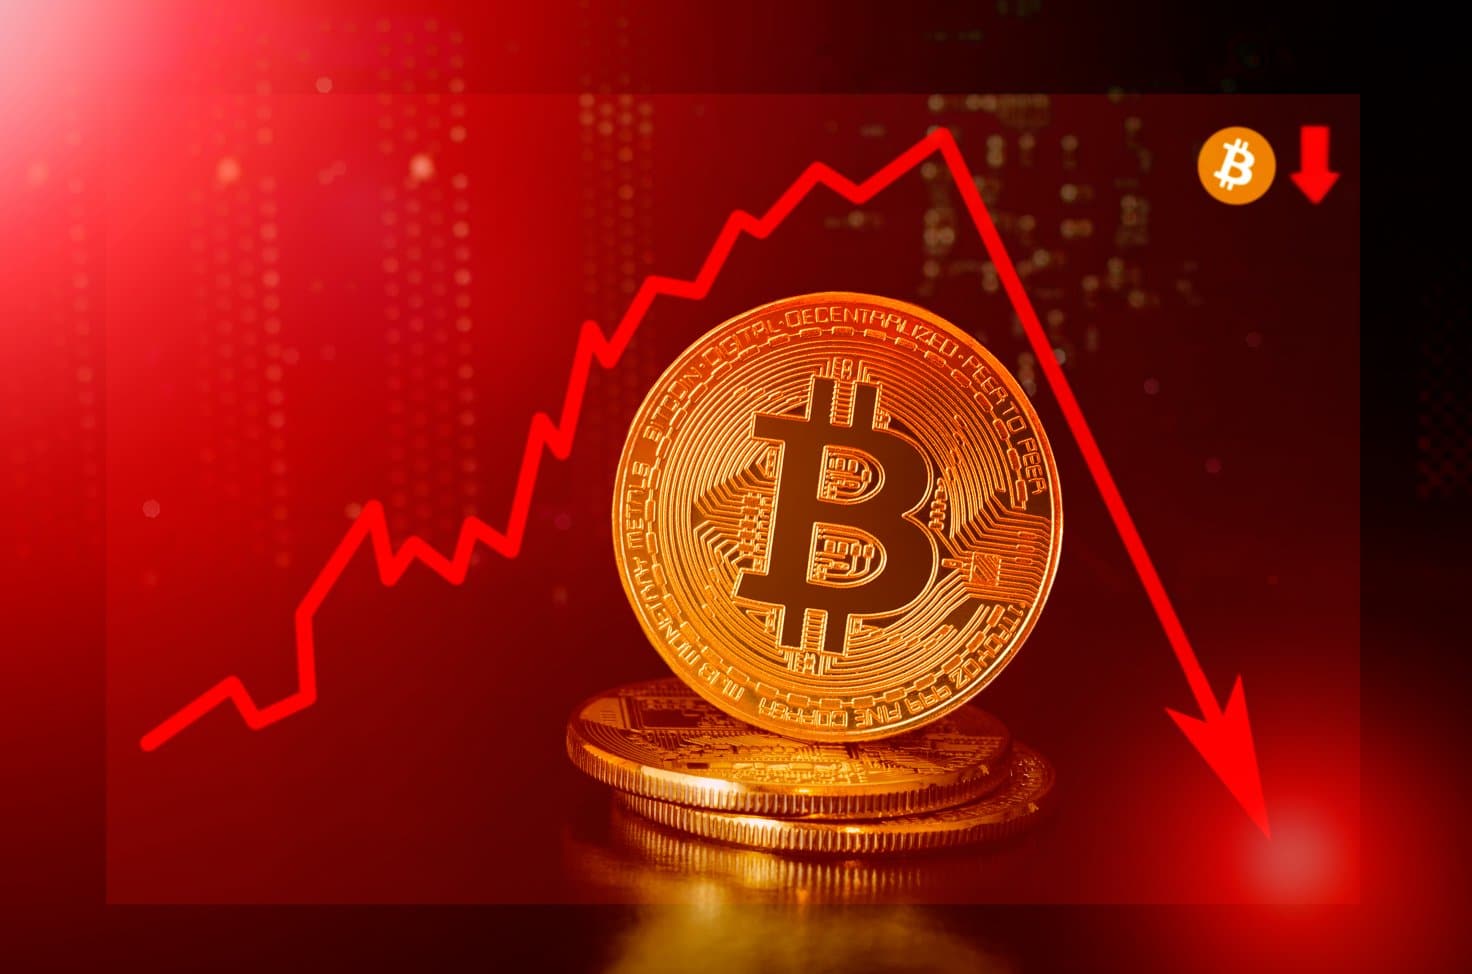 Today’s cryptocurrency prices: Bitcoin and Ether are losing steam as the virtual coin market remains turbulent